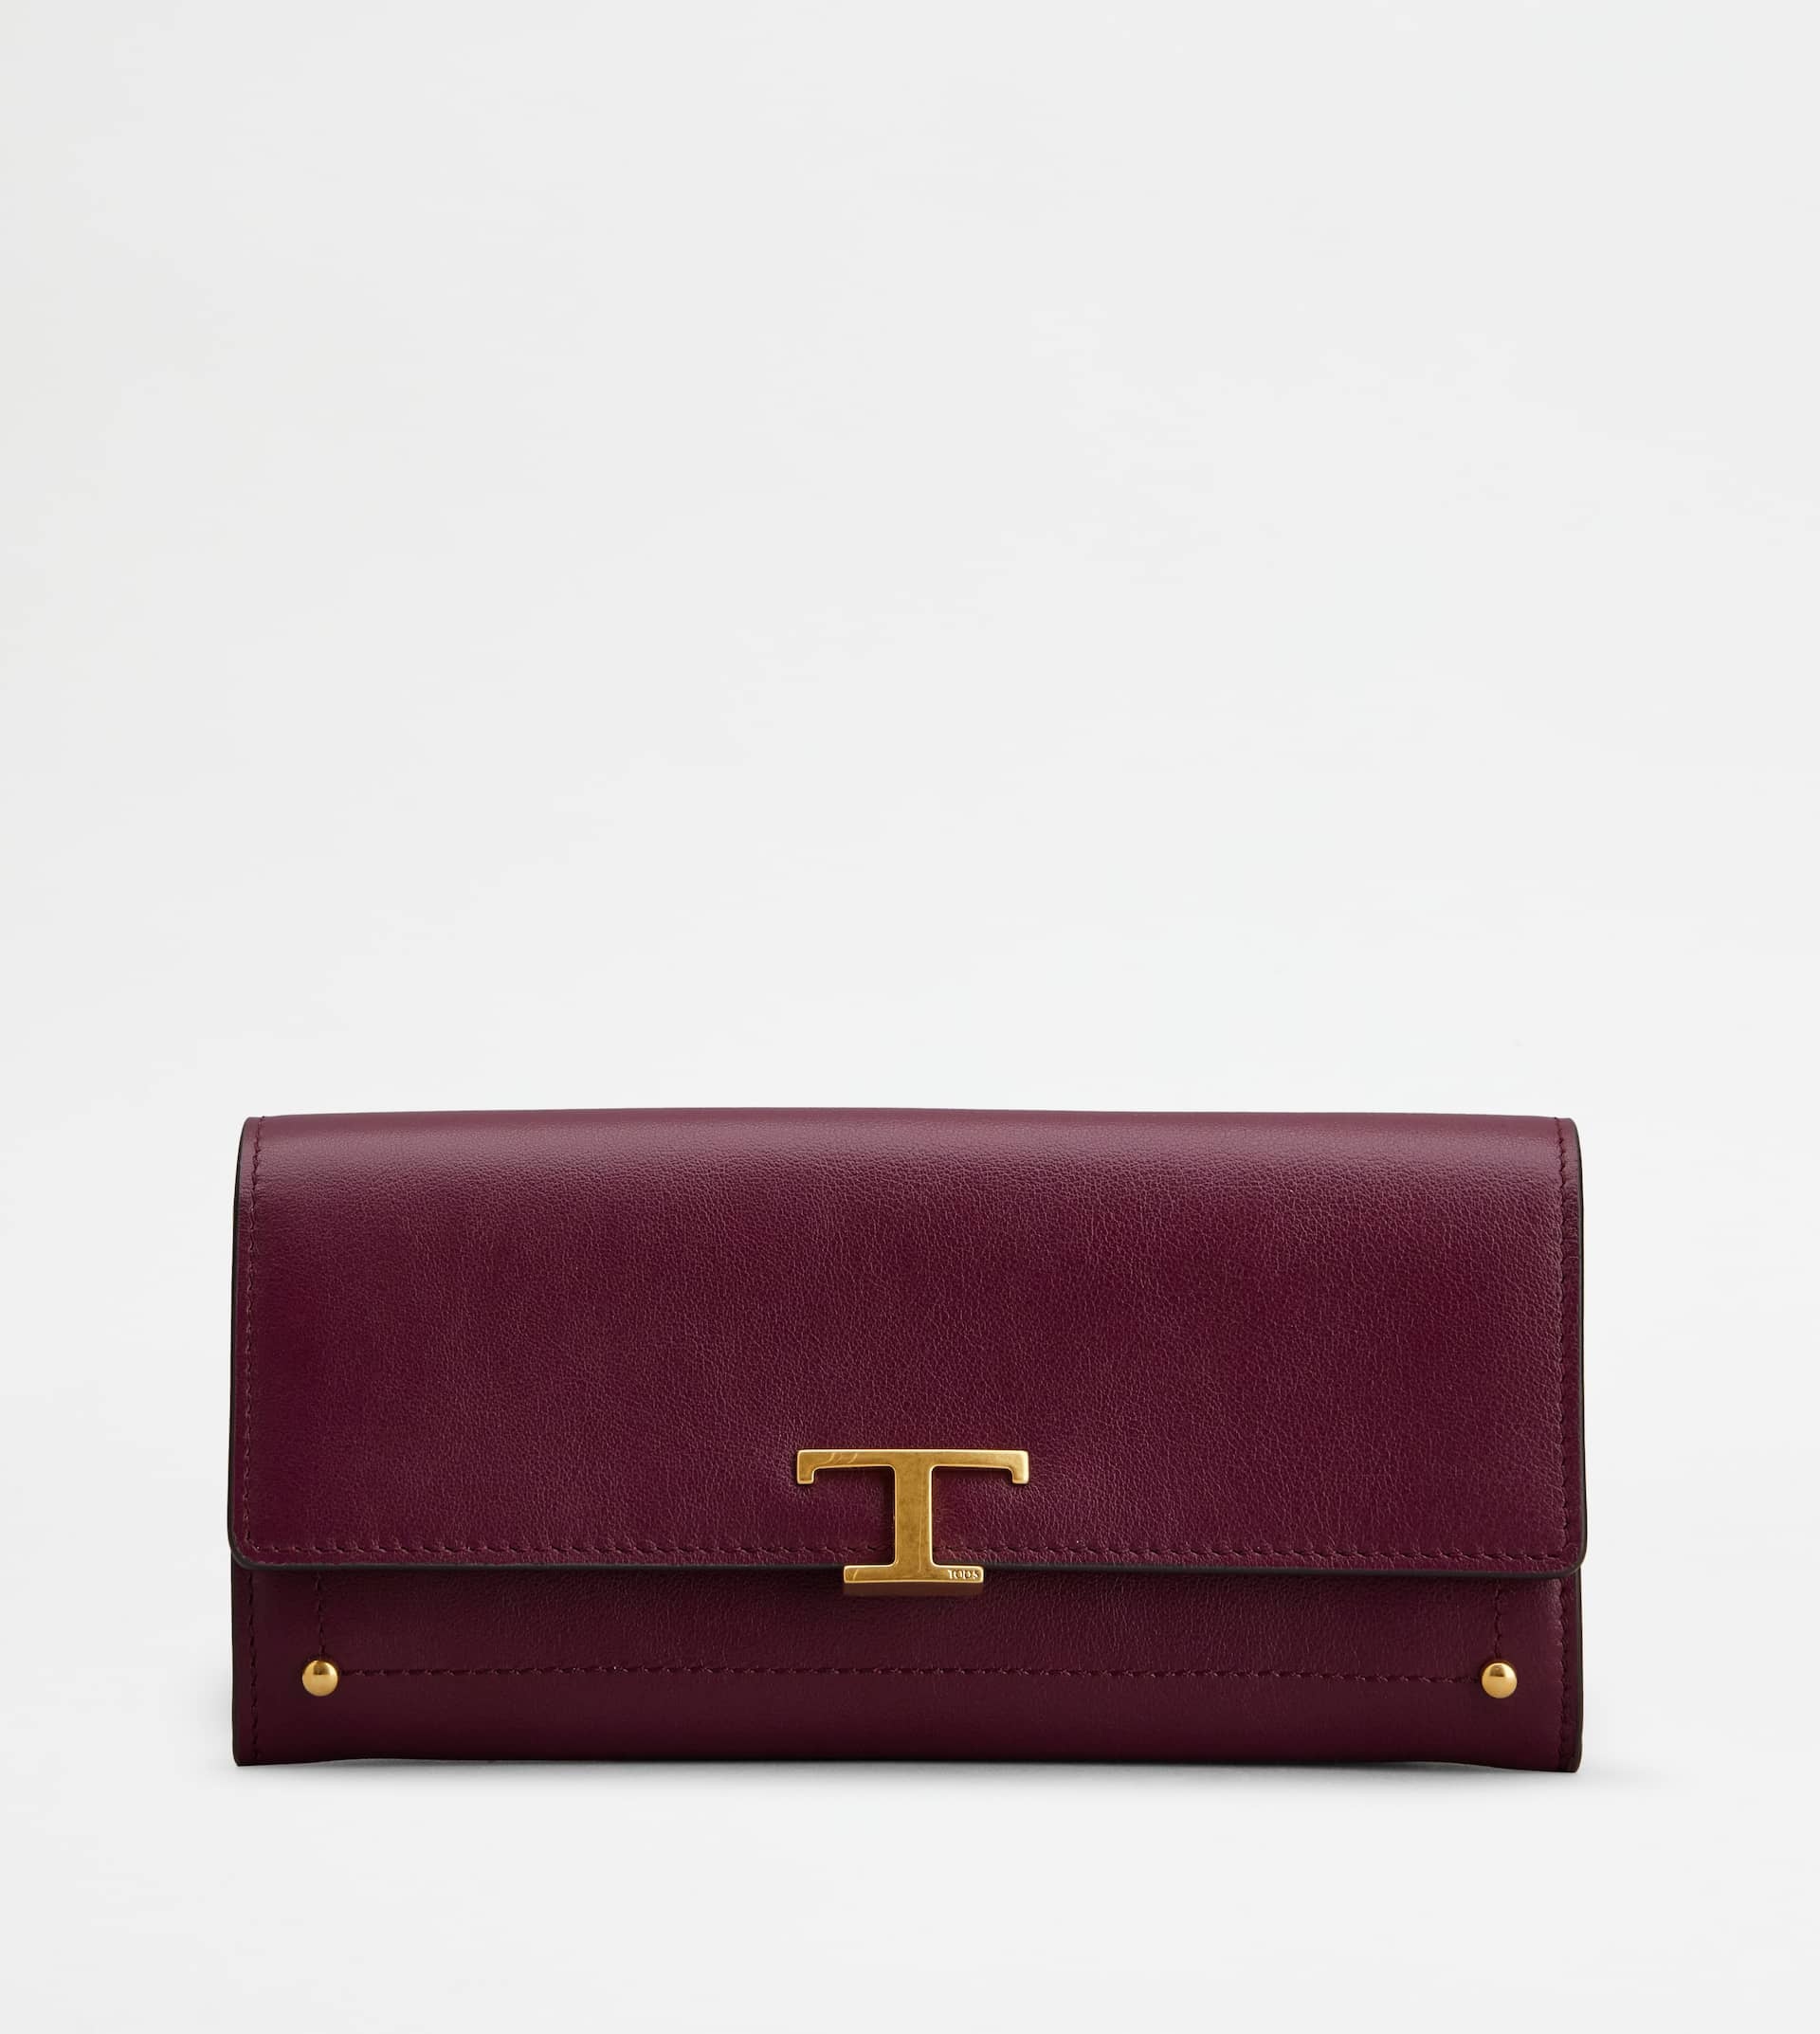 T TIMELESS WALLET IN LEATHER - BURGUNDY - 1